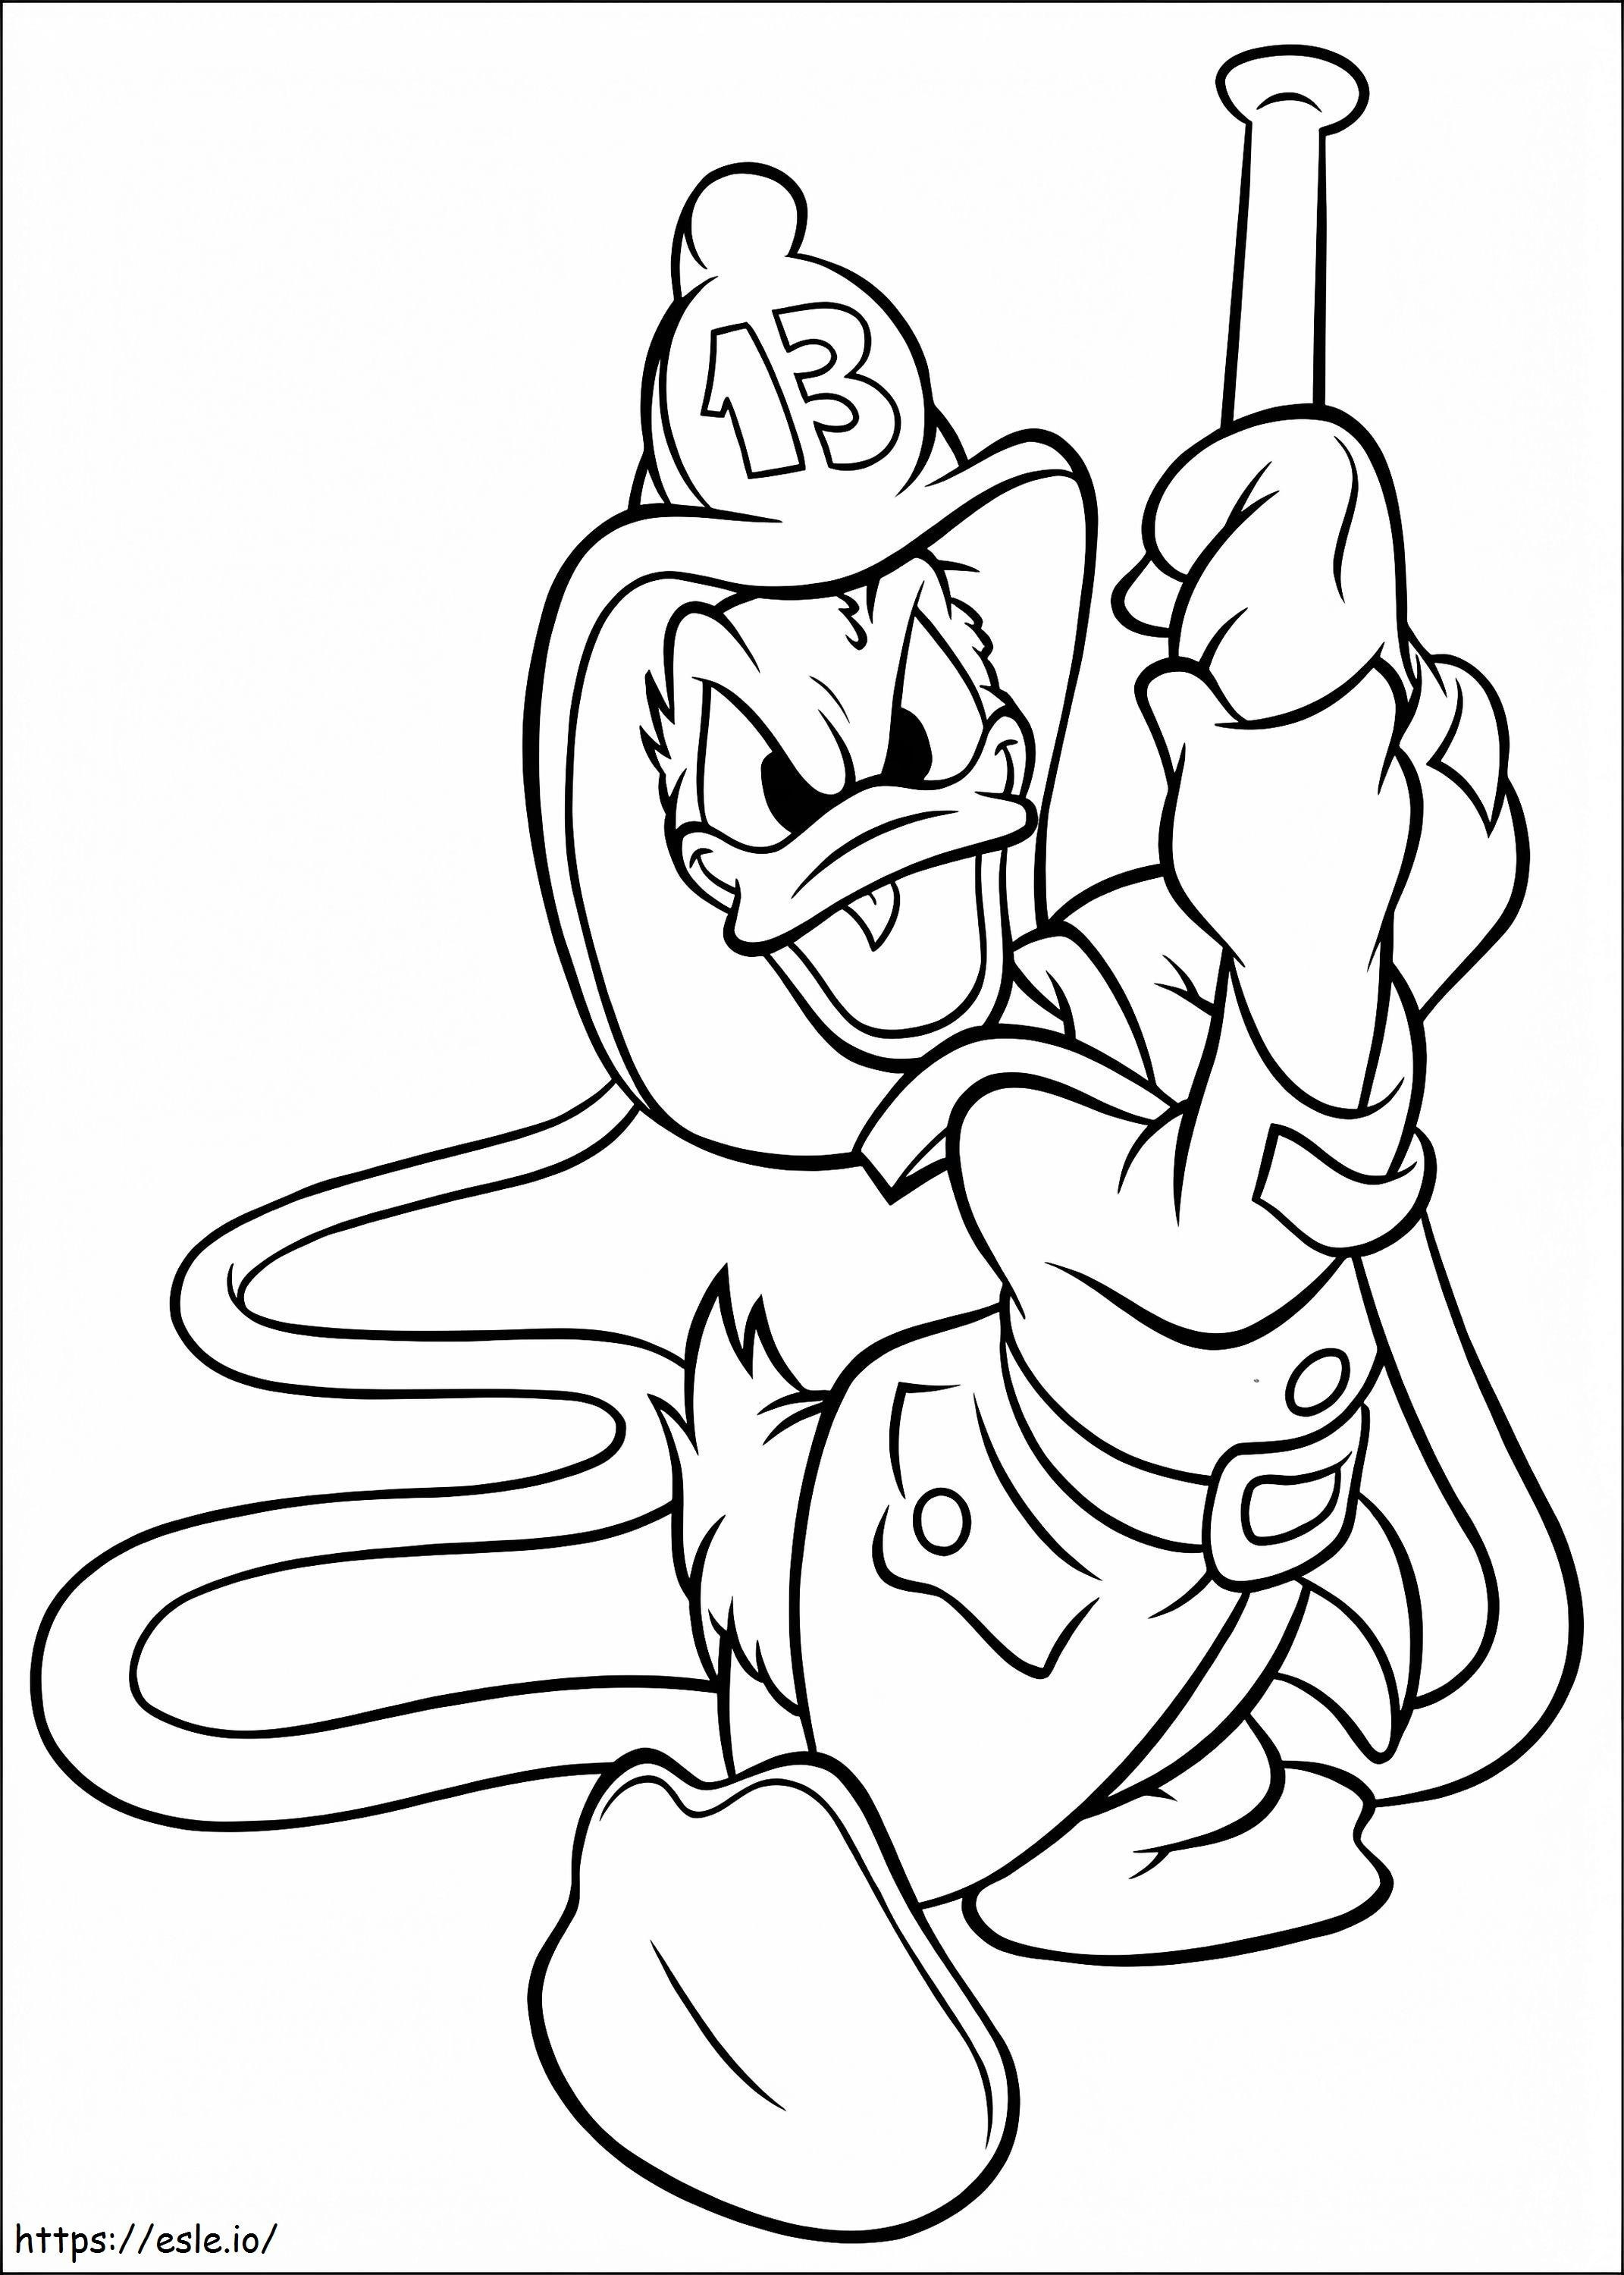 1533269814 Firefighter Donald A4 coloring page